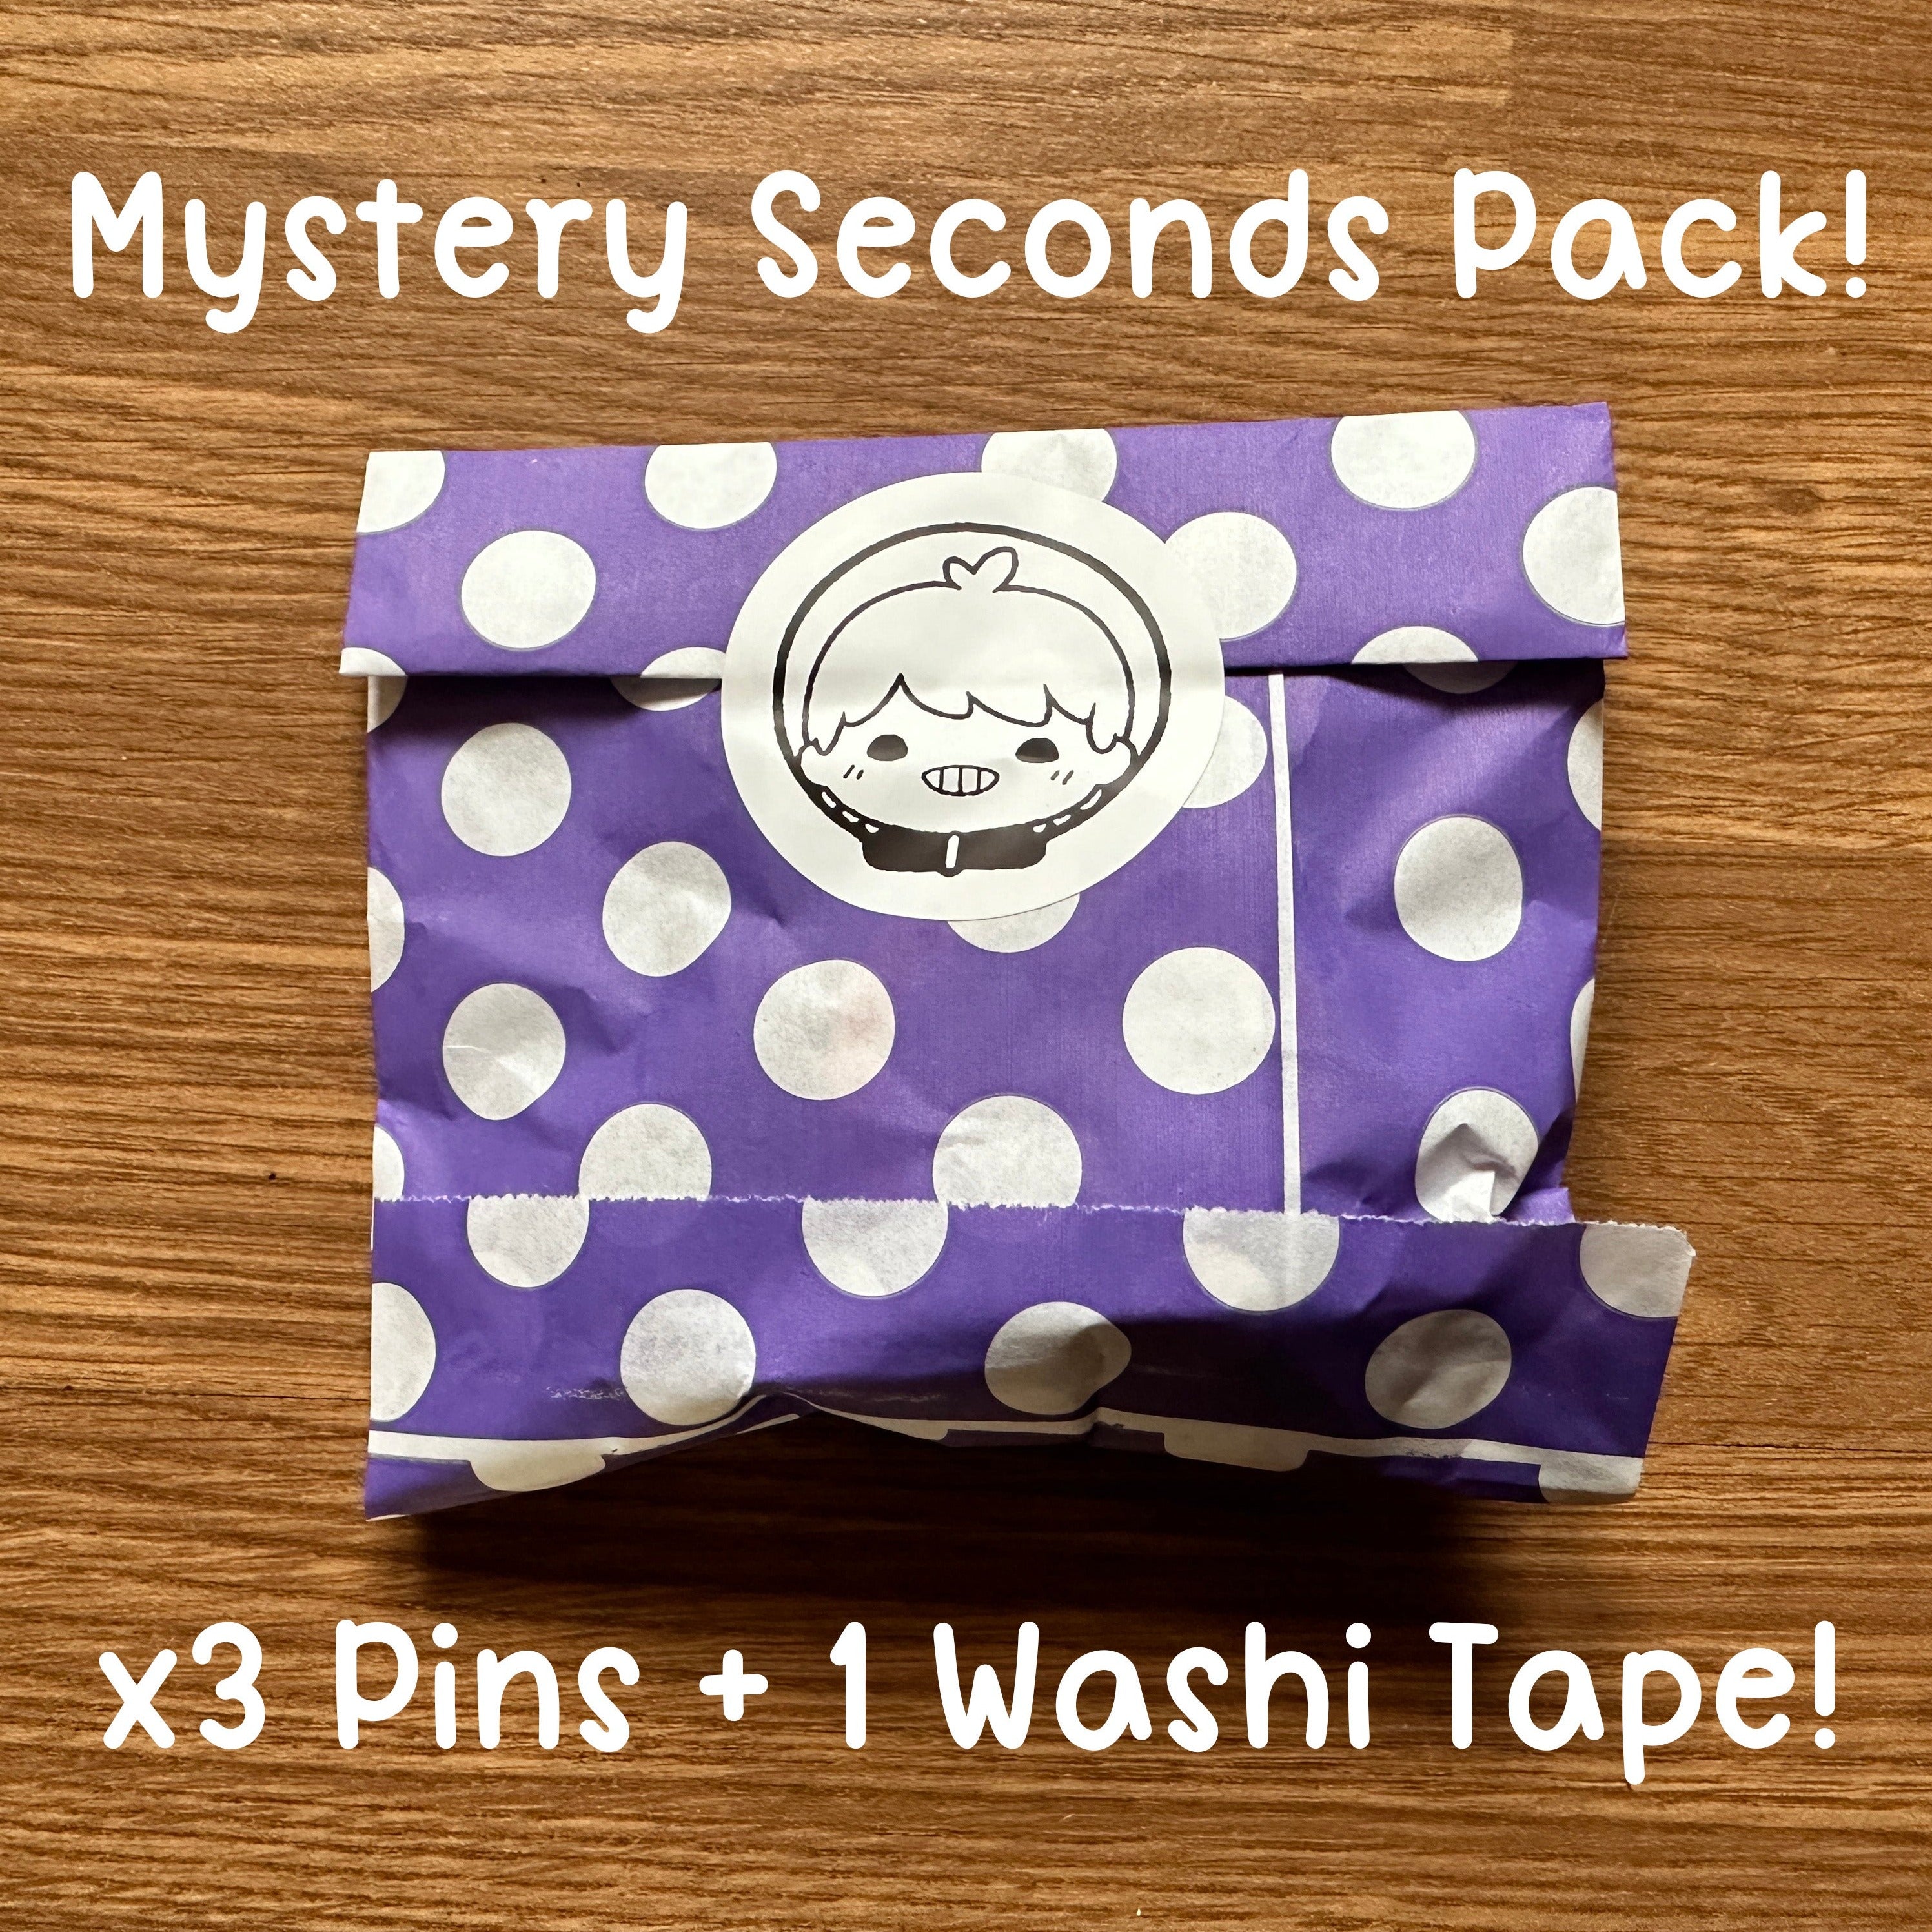 Mystery Seconds Pack! x3 Pins + 1 Washi Tape!